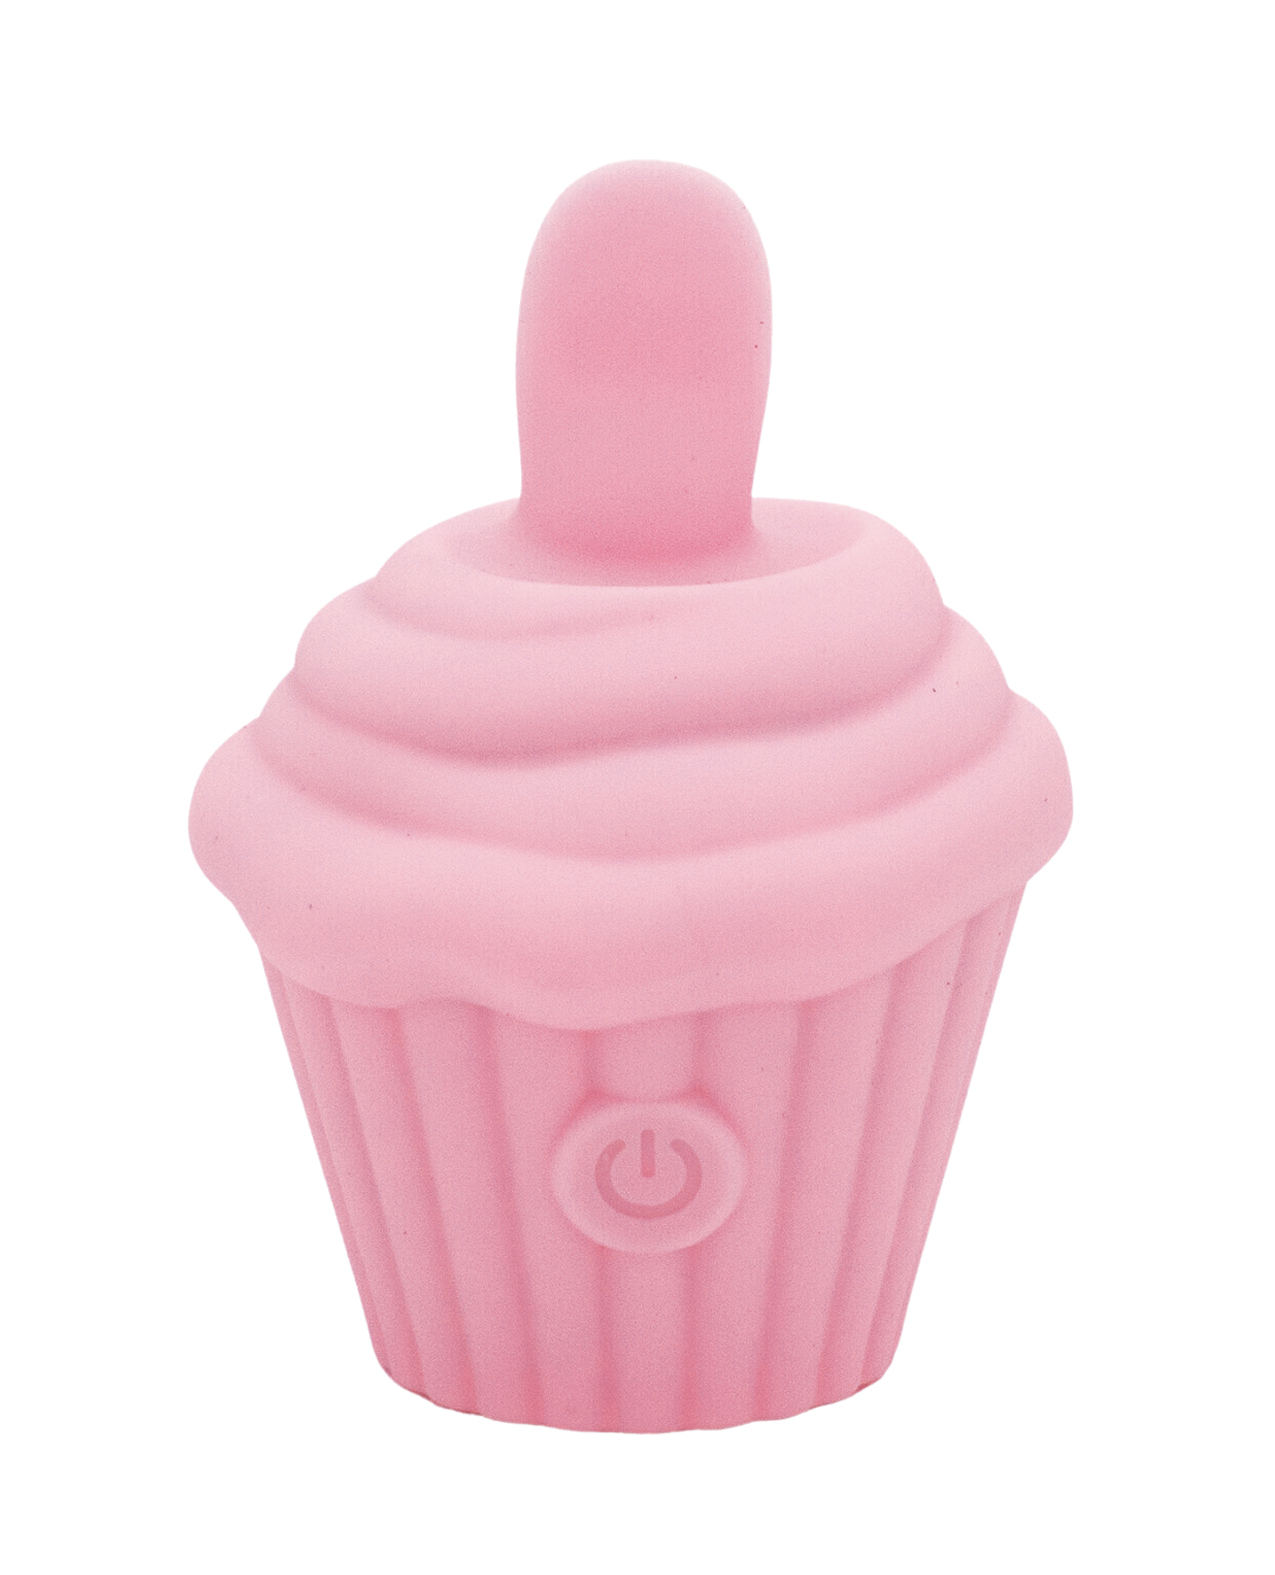 Pink cupcake shaped toy with a stimulating tongue